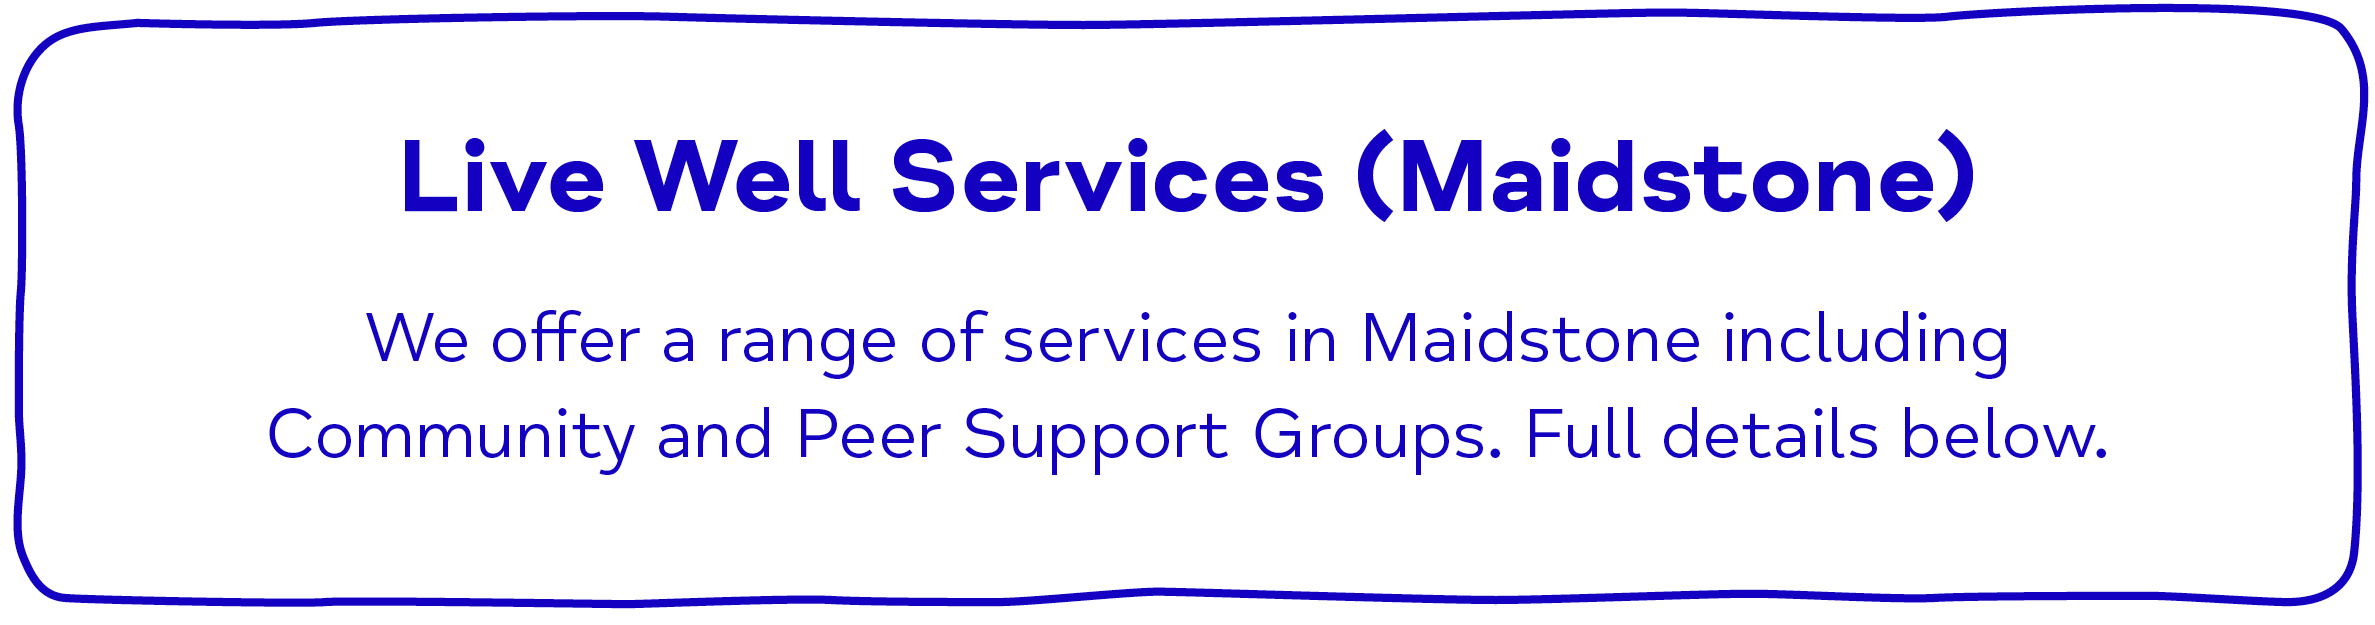 Live Well Services (Maidstone) We offer a range of services in Maidstone including Community and Peer Support Groups. Full details below.